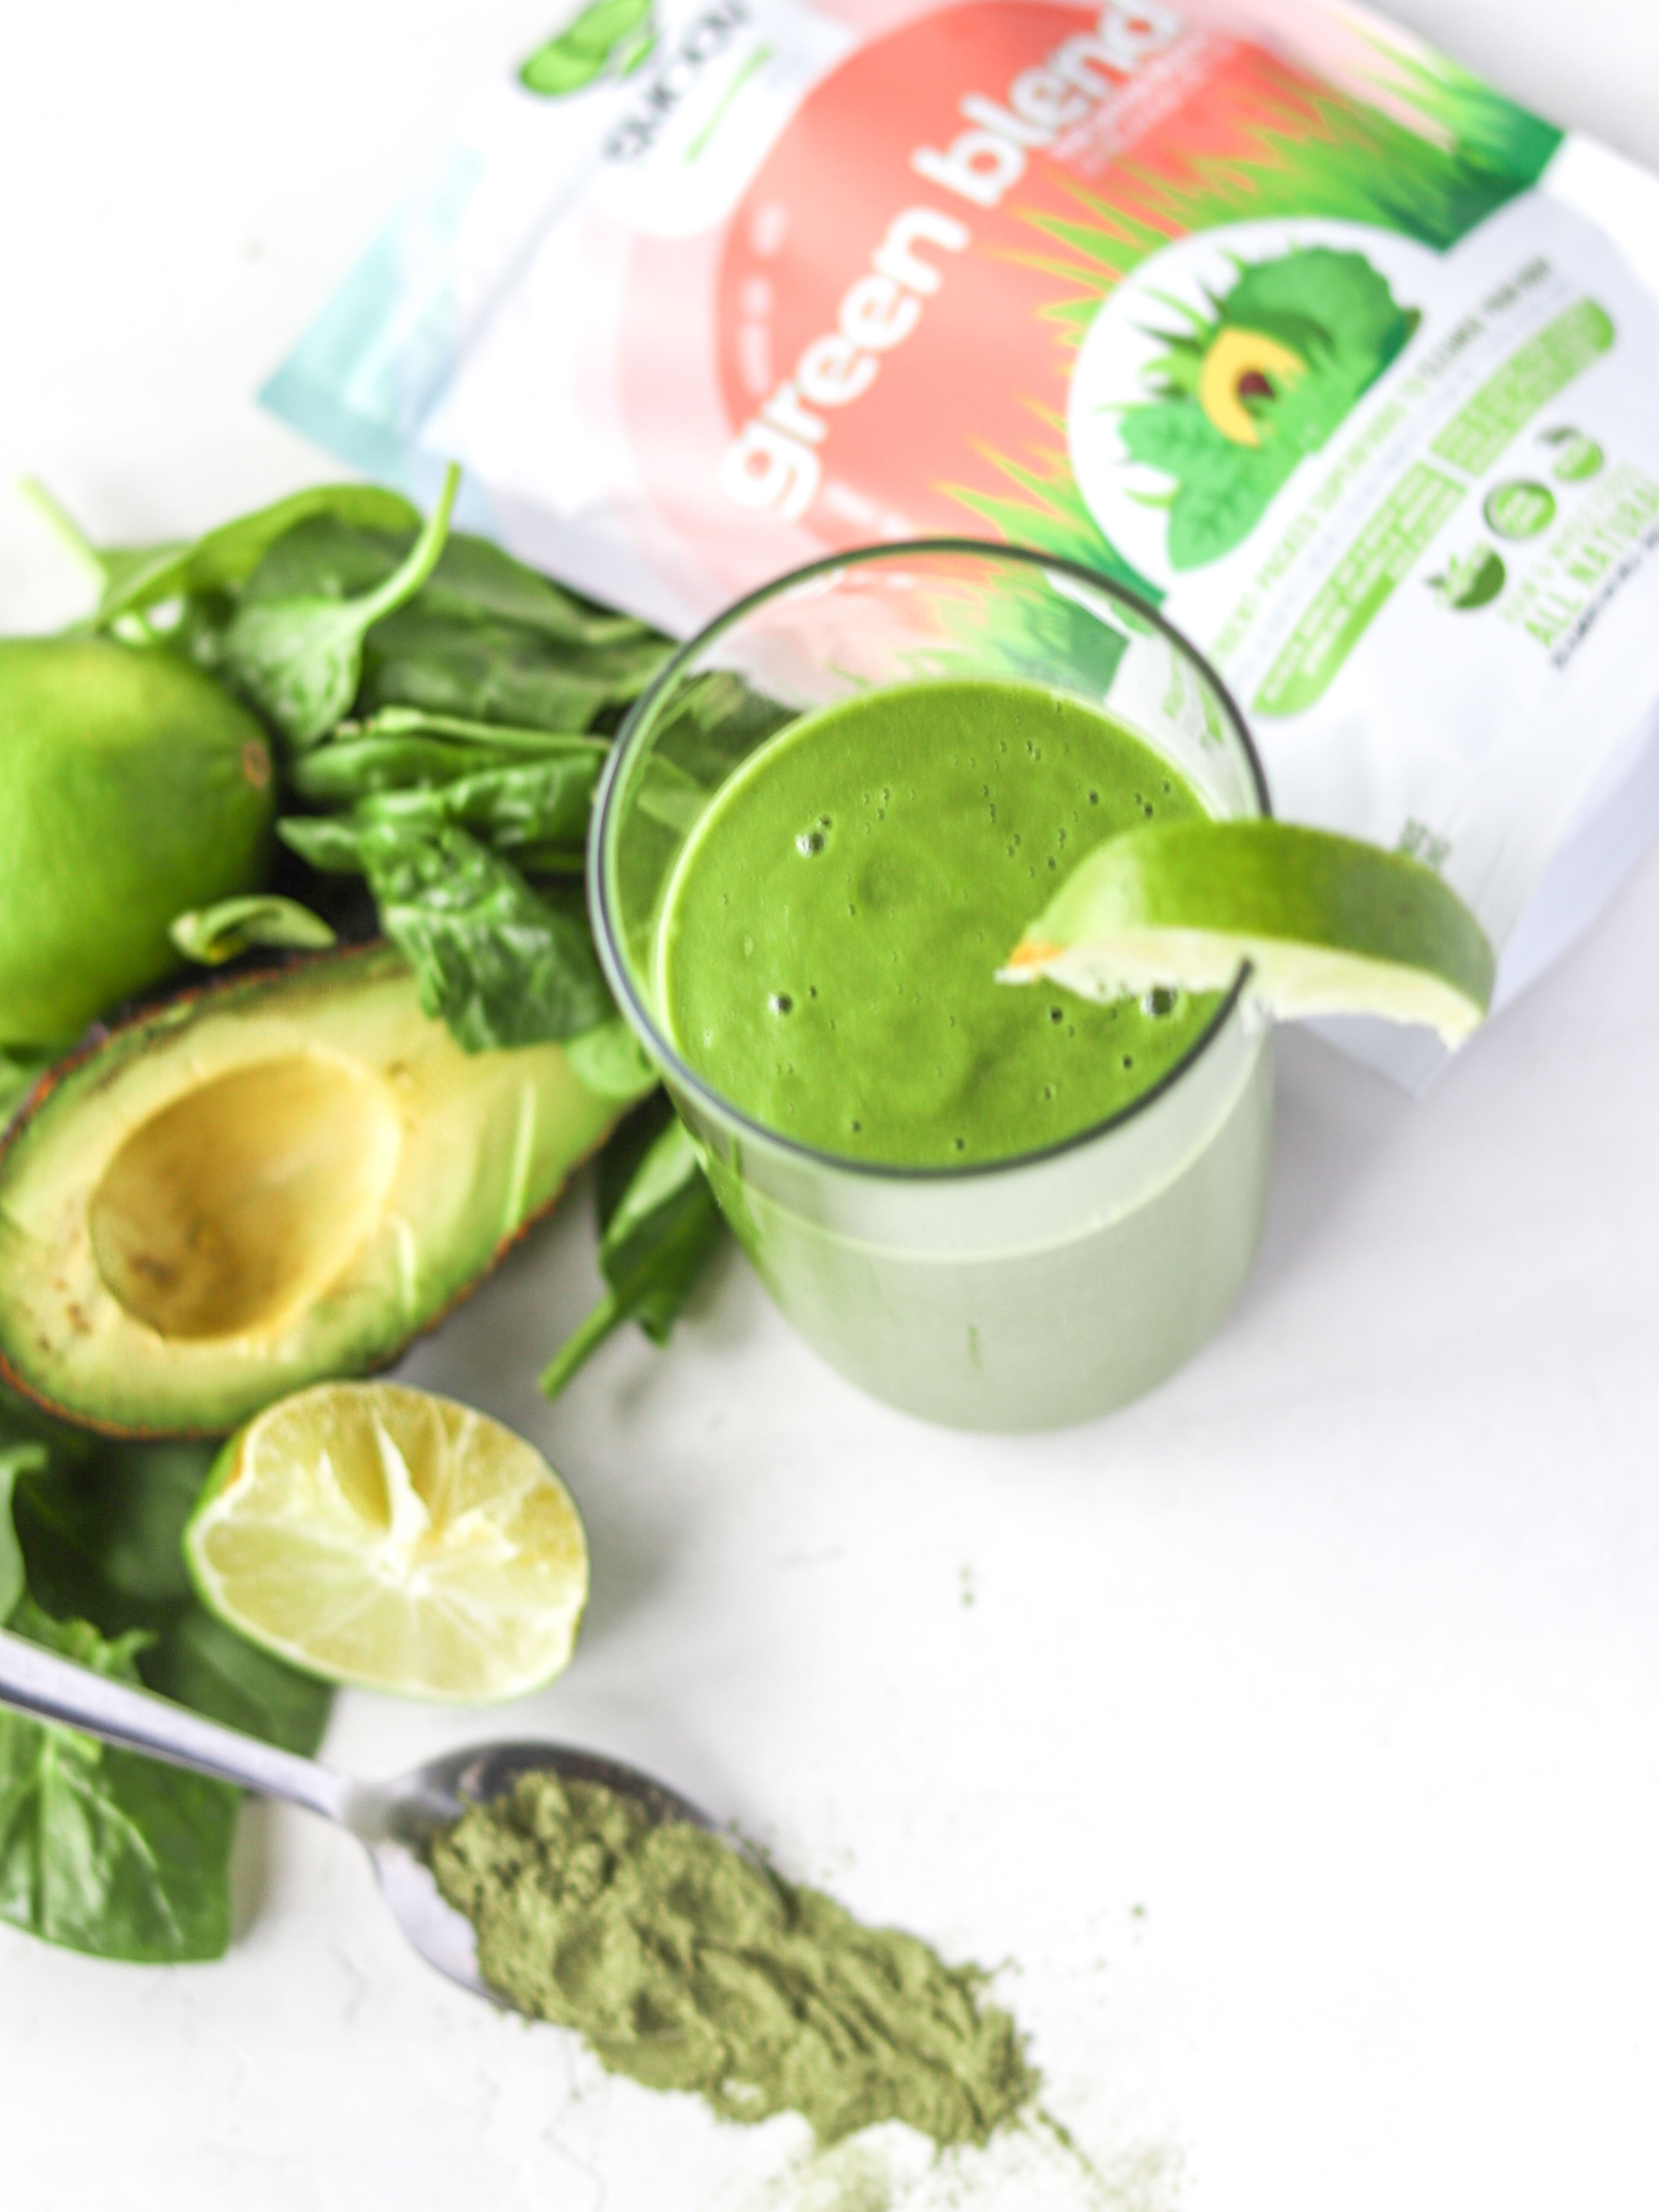 SMOOV green blend has 9 powerful superfoods with no added sugar, caffeine or additives. The easiest all-natural way to get your greens and nutrition